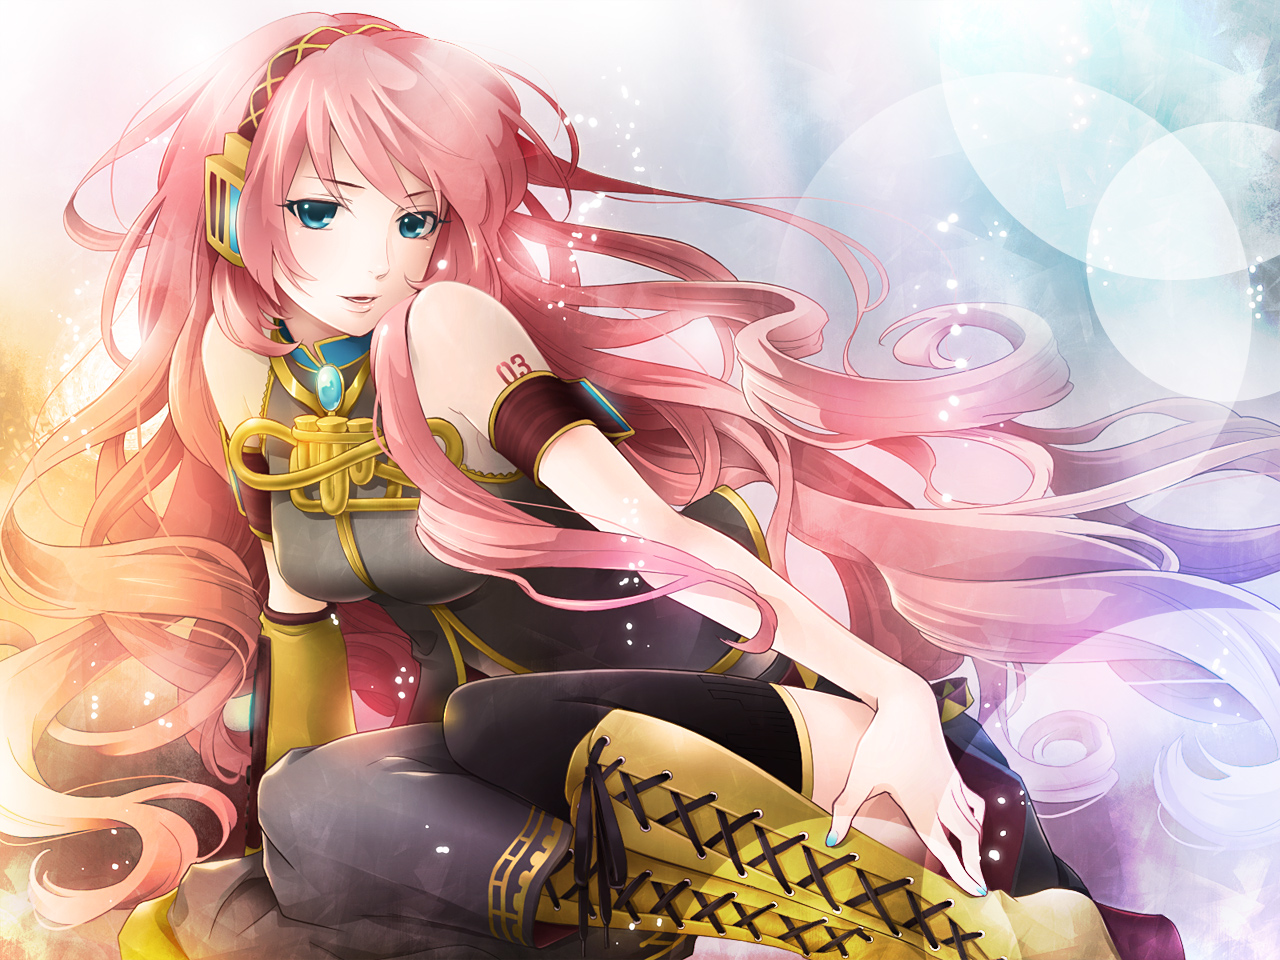 Luka-vocaloid-characters-E2-99-AB-32570291-1280-960